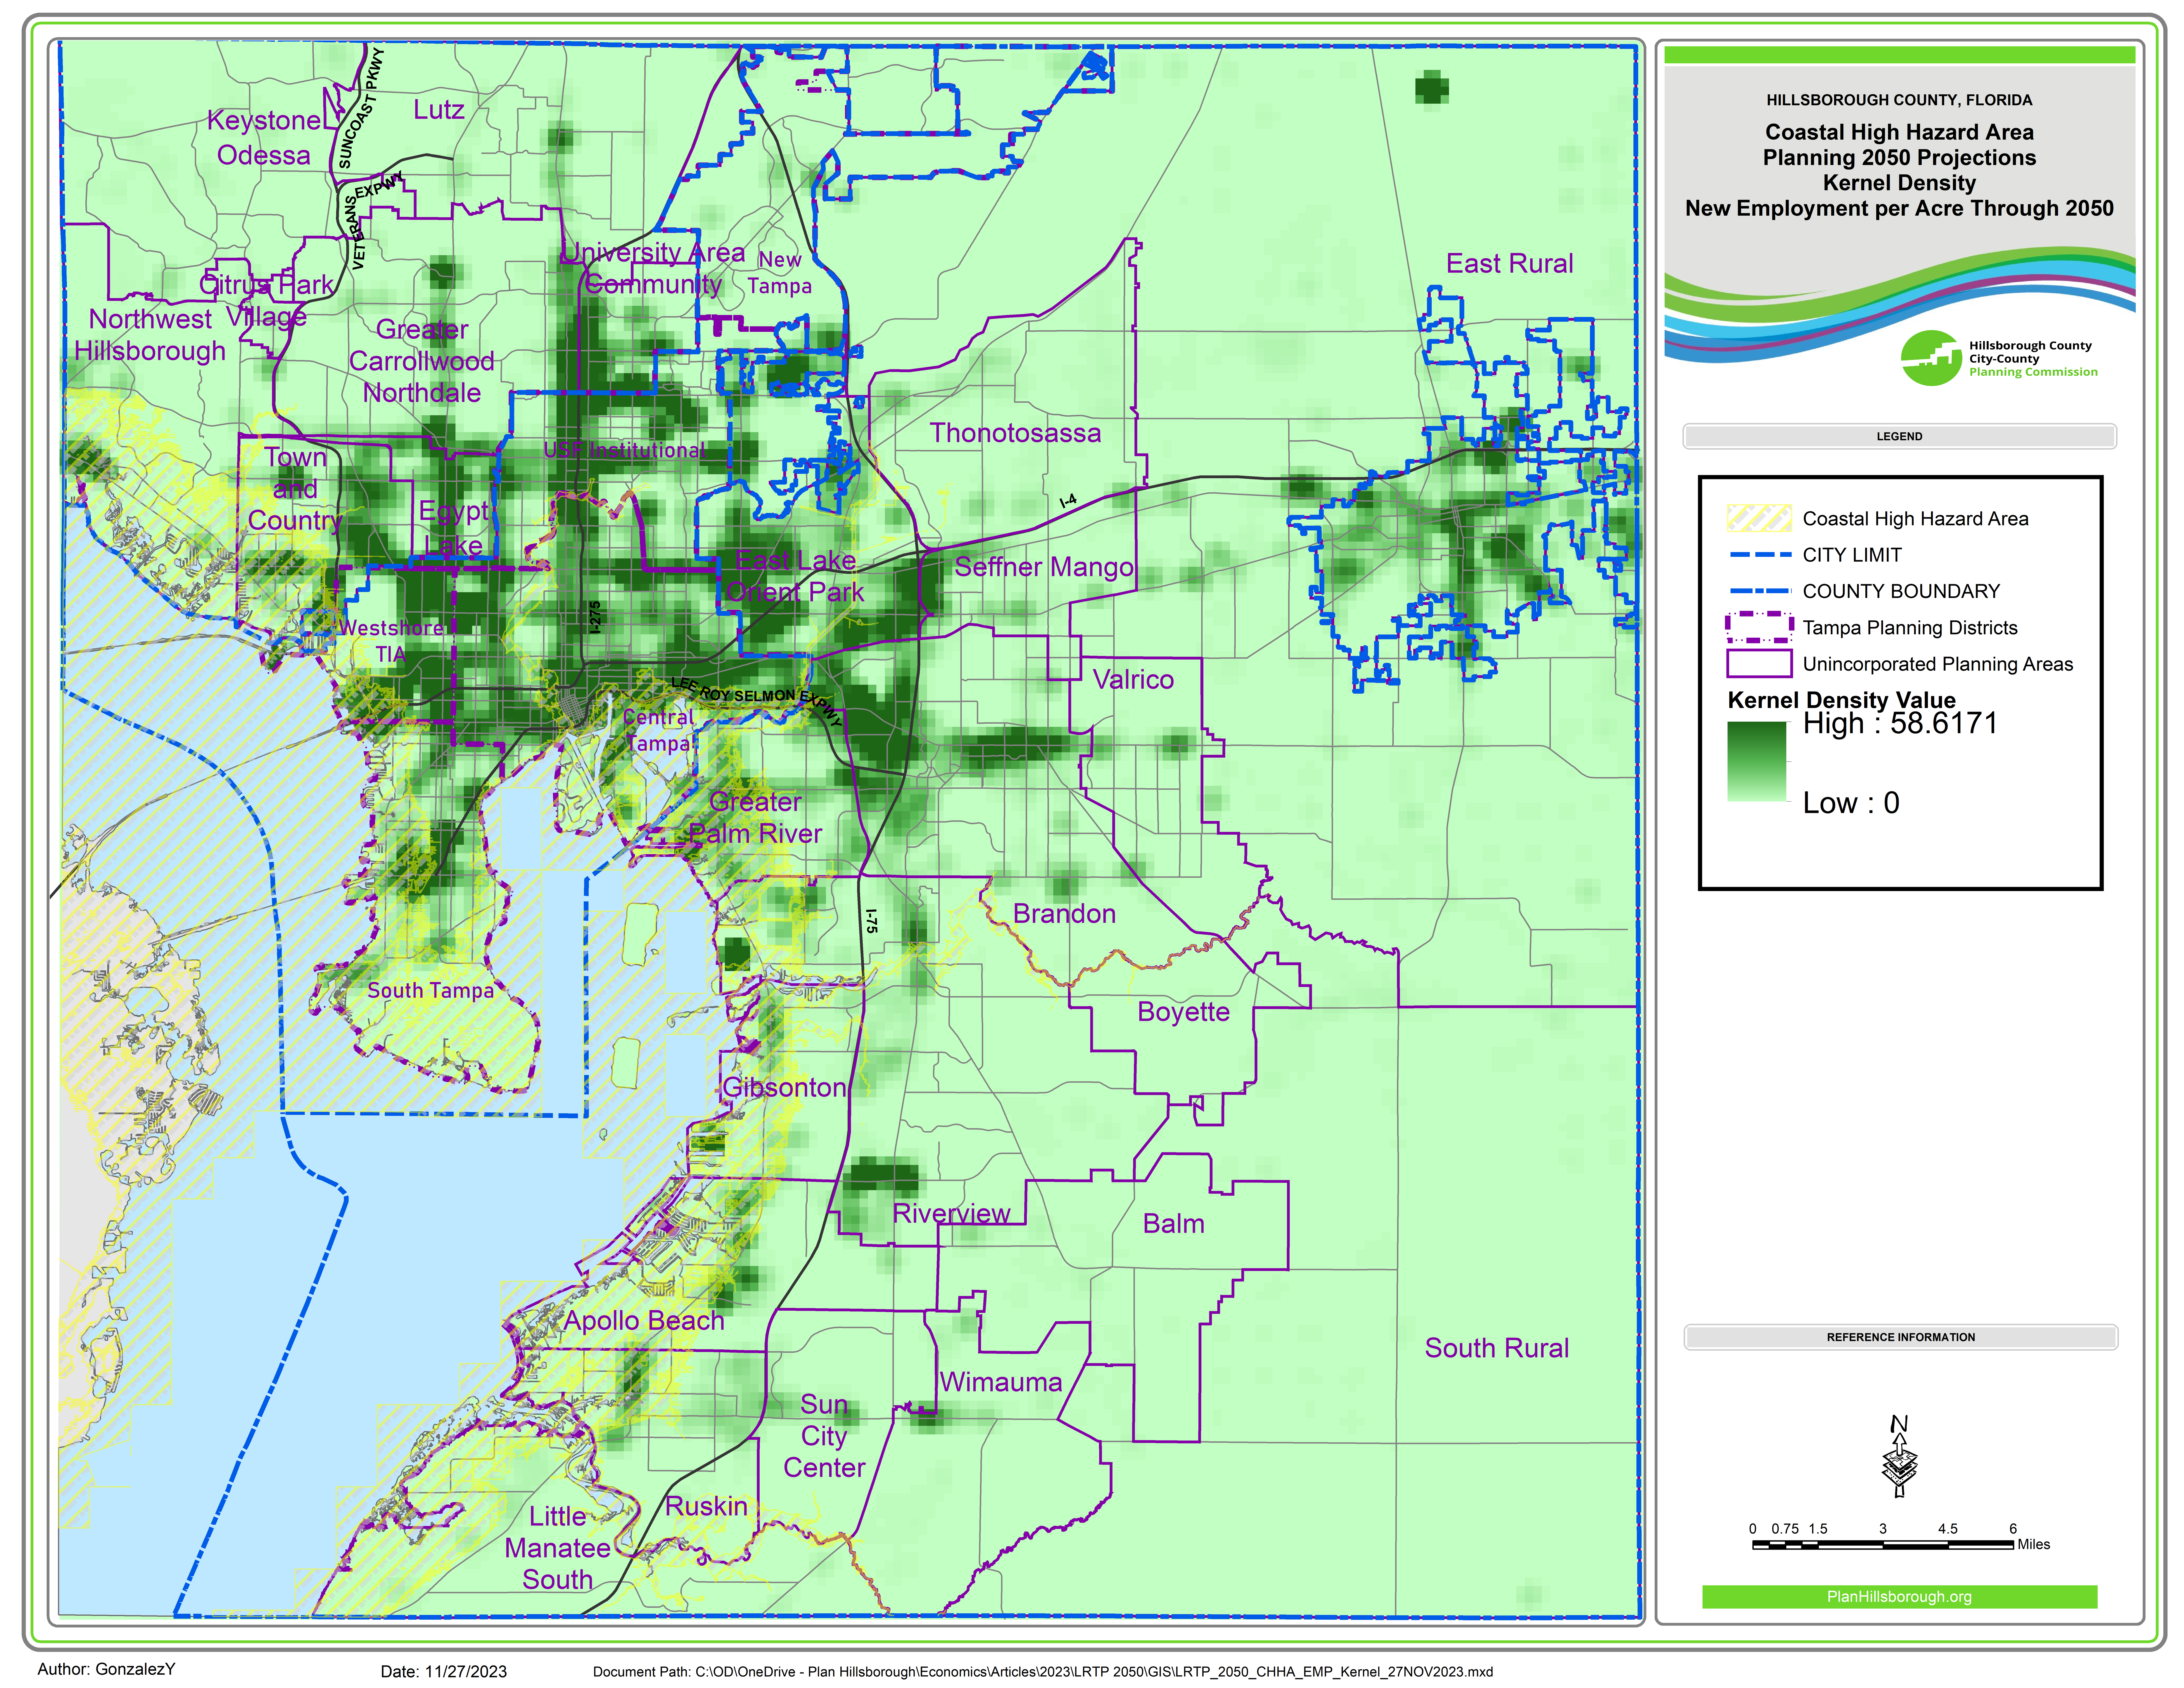 This map shows new jobs per acre through 2050 for Hillsborough County. The map shows Tampa's planning districts, UHC's unincorporated planning areas, and the coastal high hazard area (hatched). Darker green areas denote a higher number of new jobs per acre through 2050.